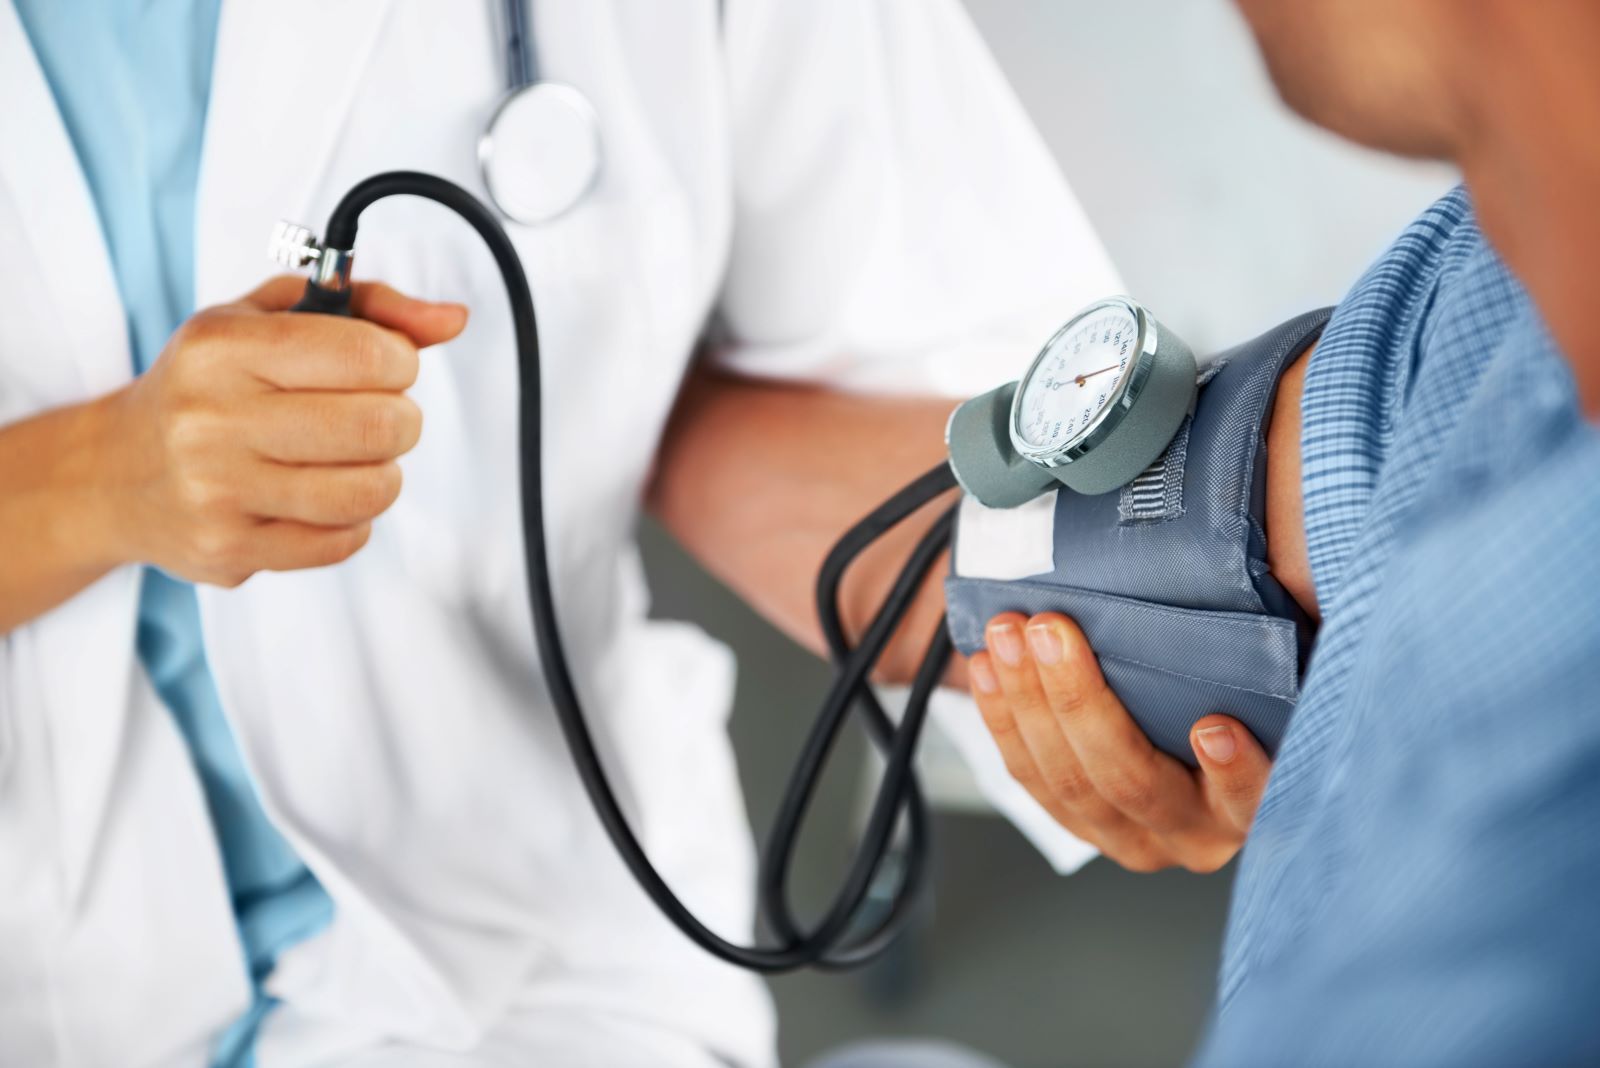 What Can I Do if My Blood Pressure Isn't Responding to Medication?